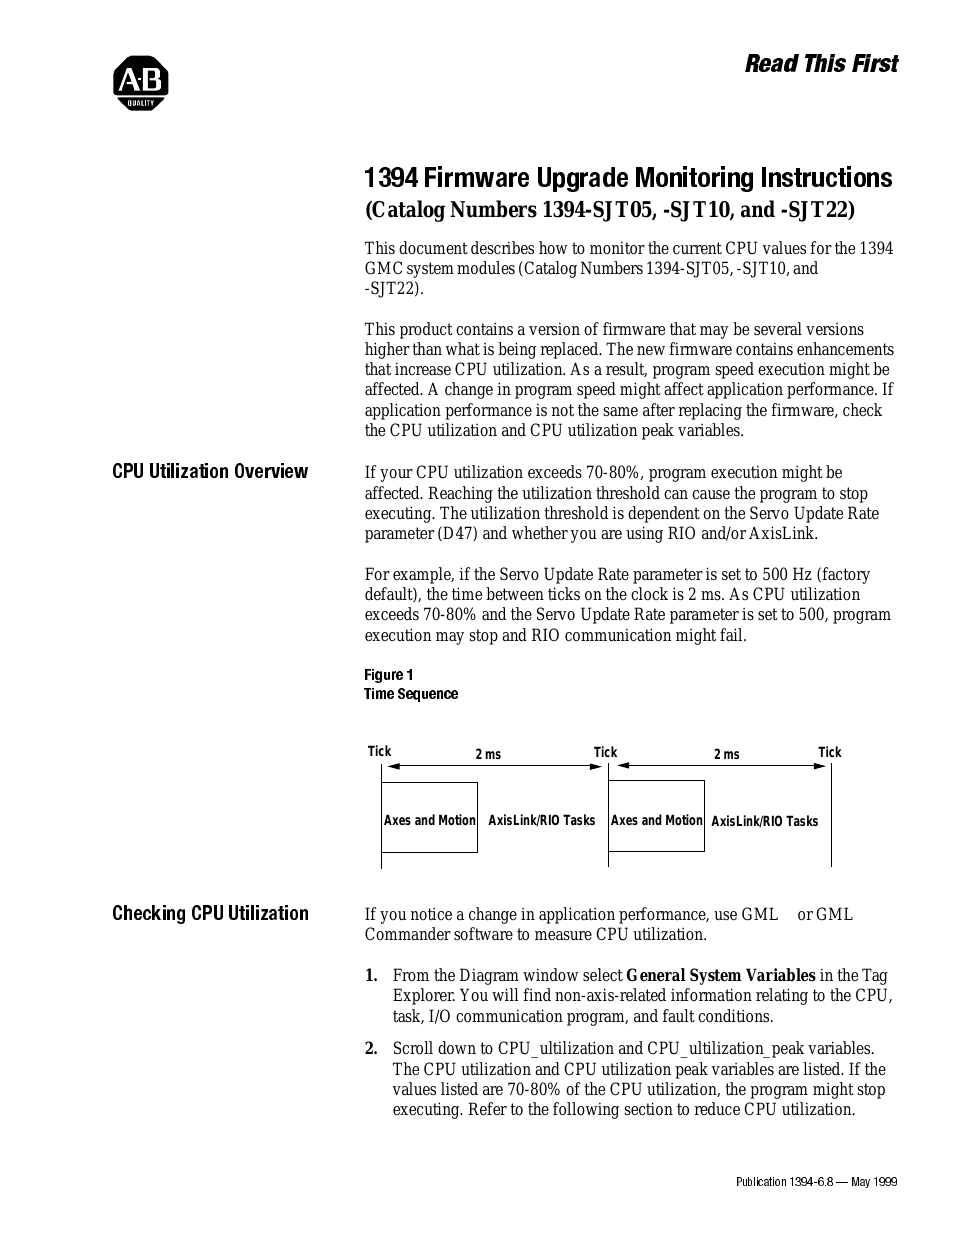 1394-SJT10 Firmware Upgrade Monitoring Instructions